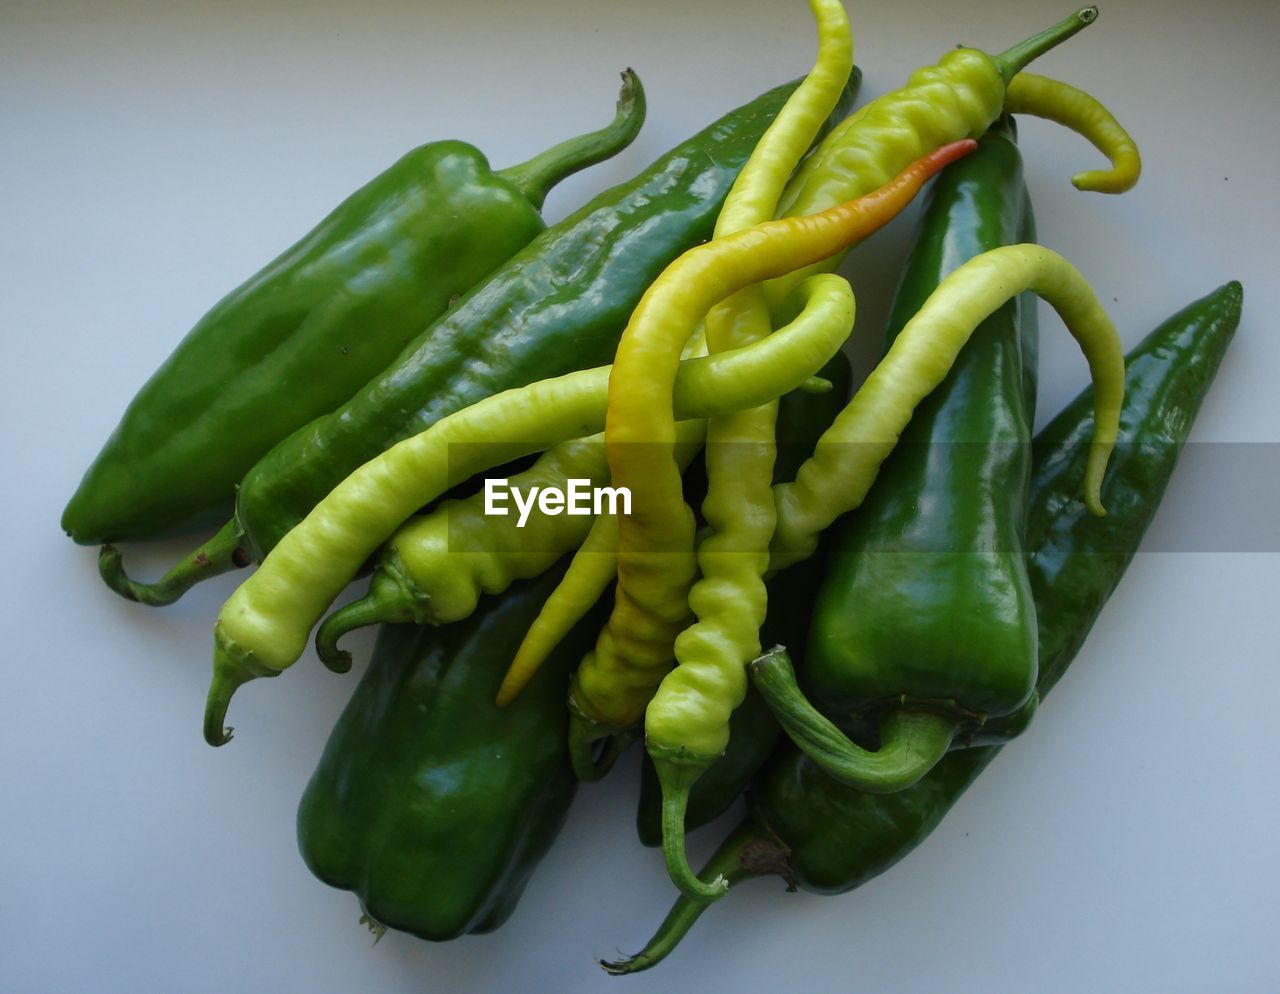 High angle view of green chili peppers